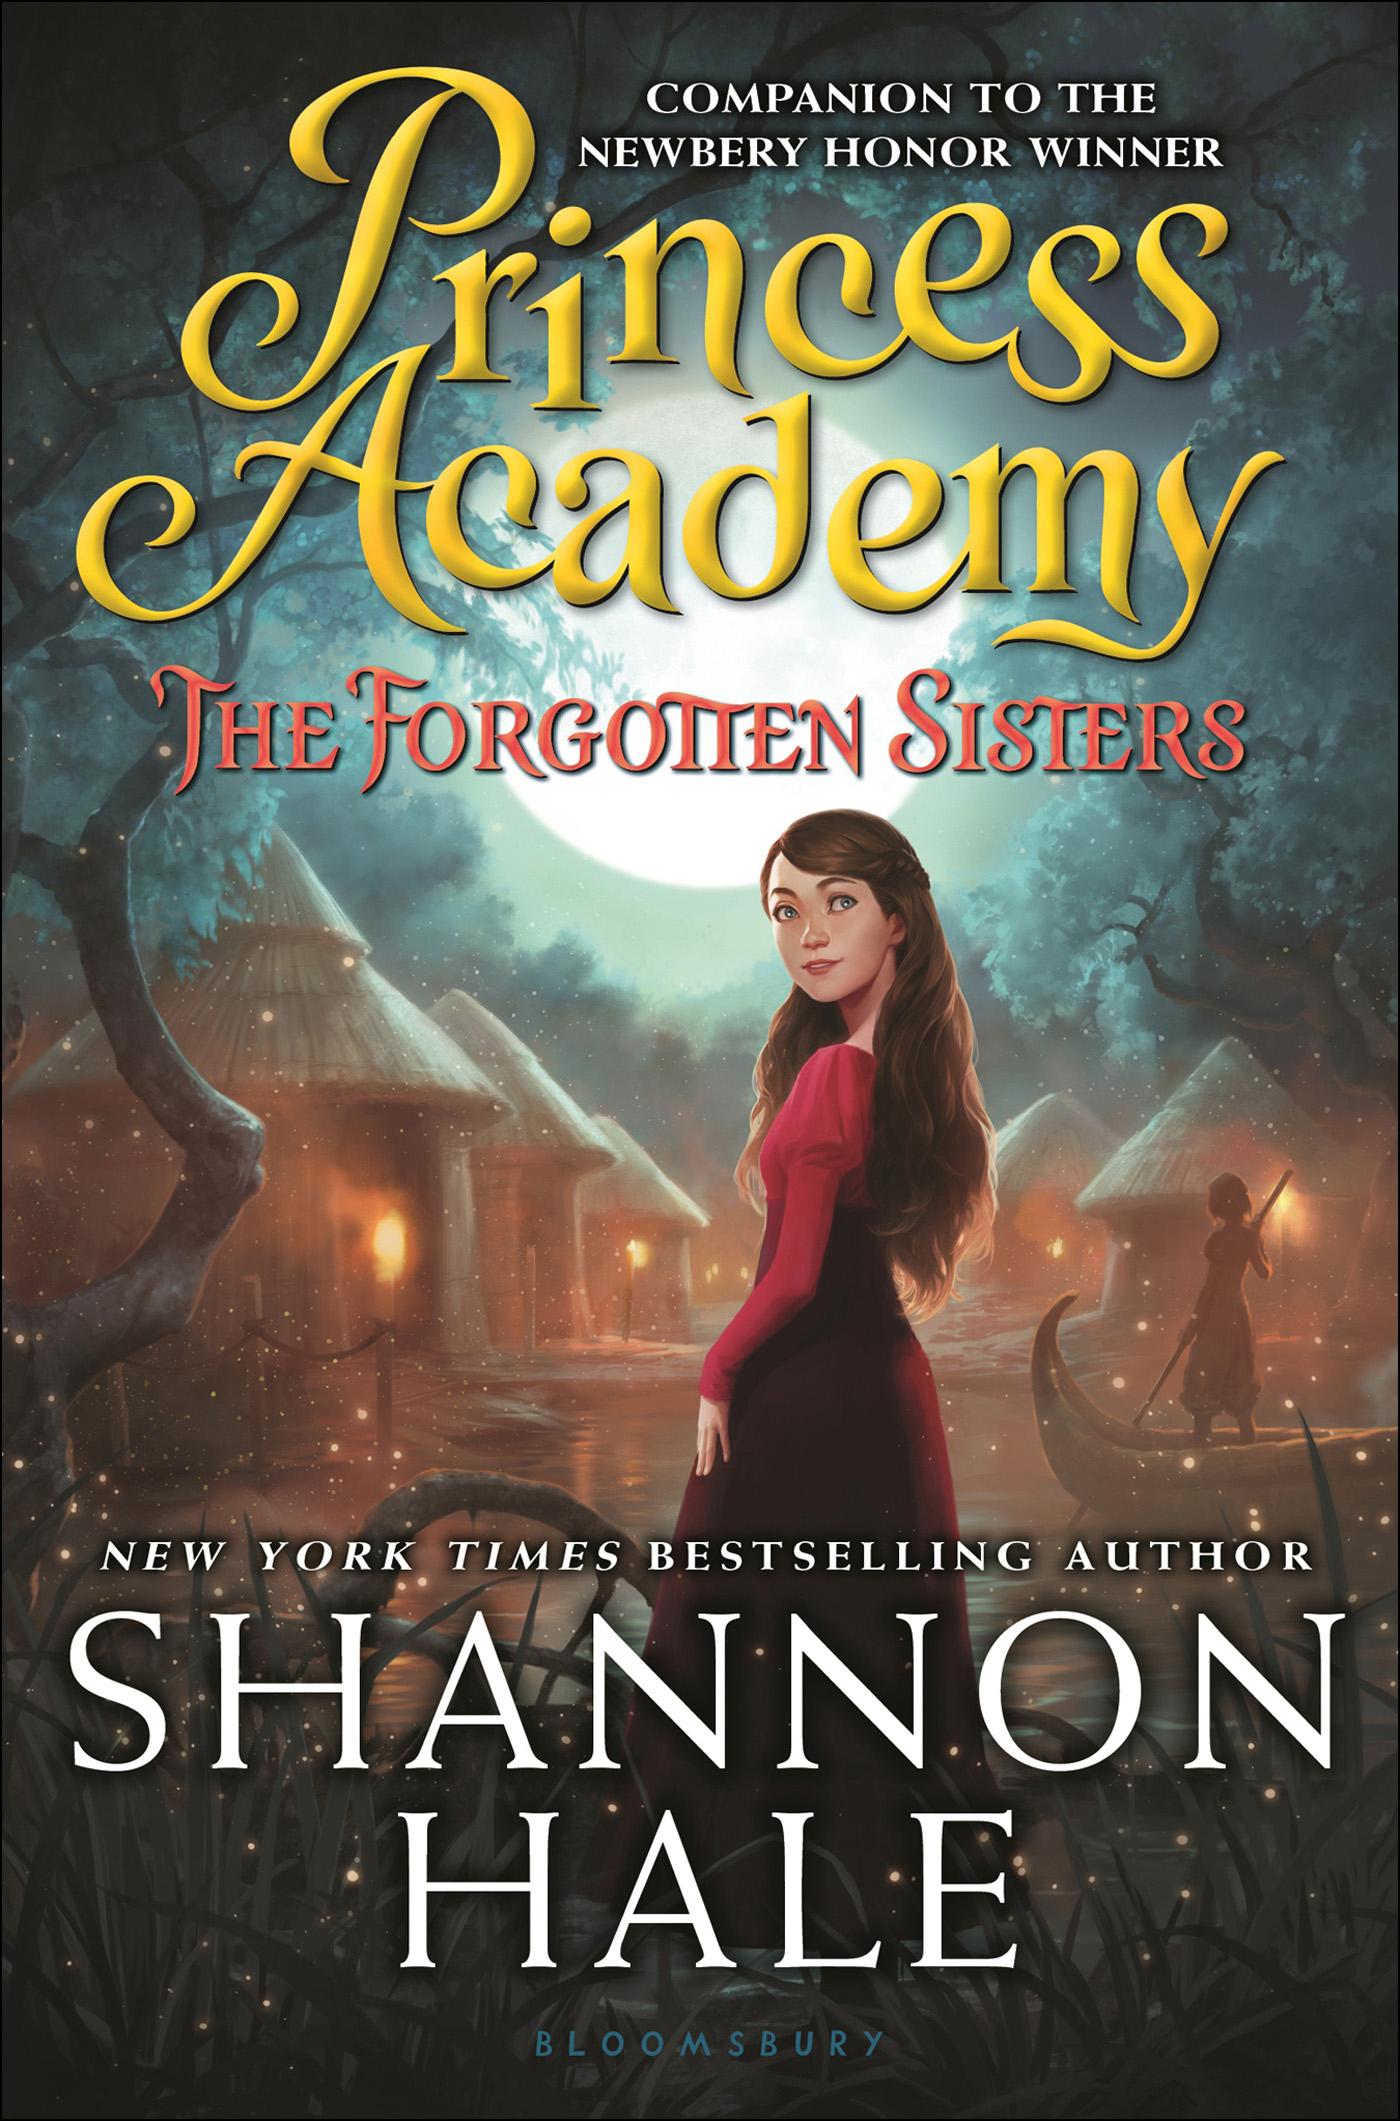 The Forgotten Sisters (2015) by Shannon Hale